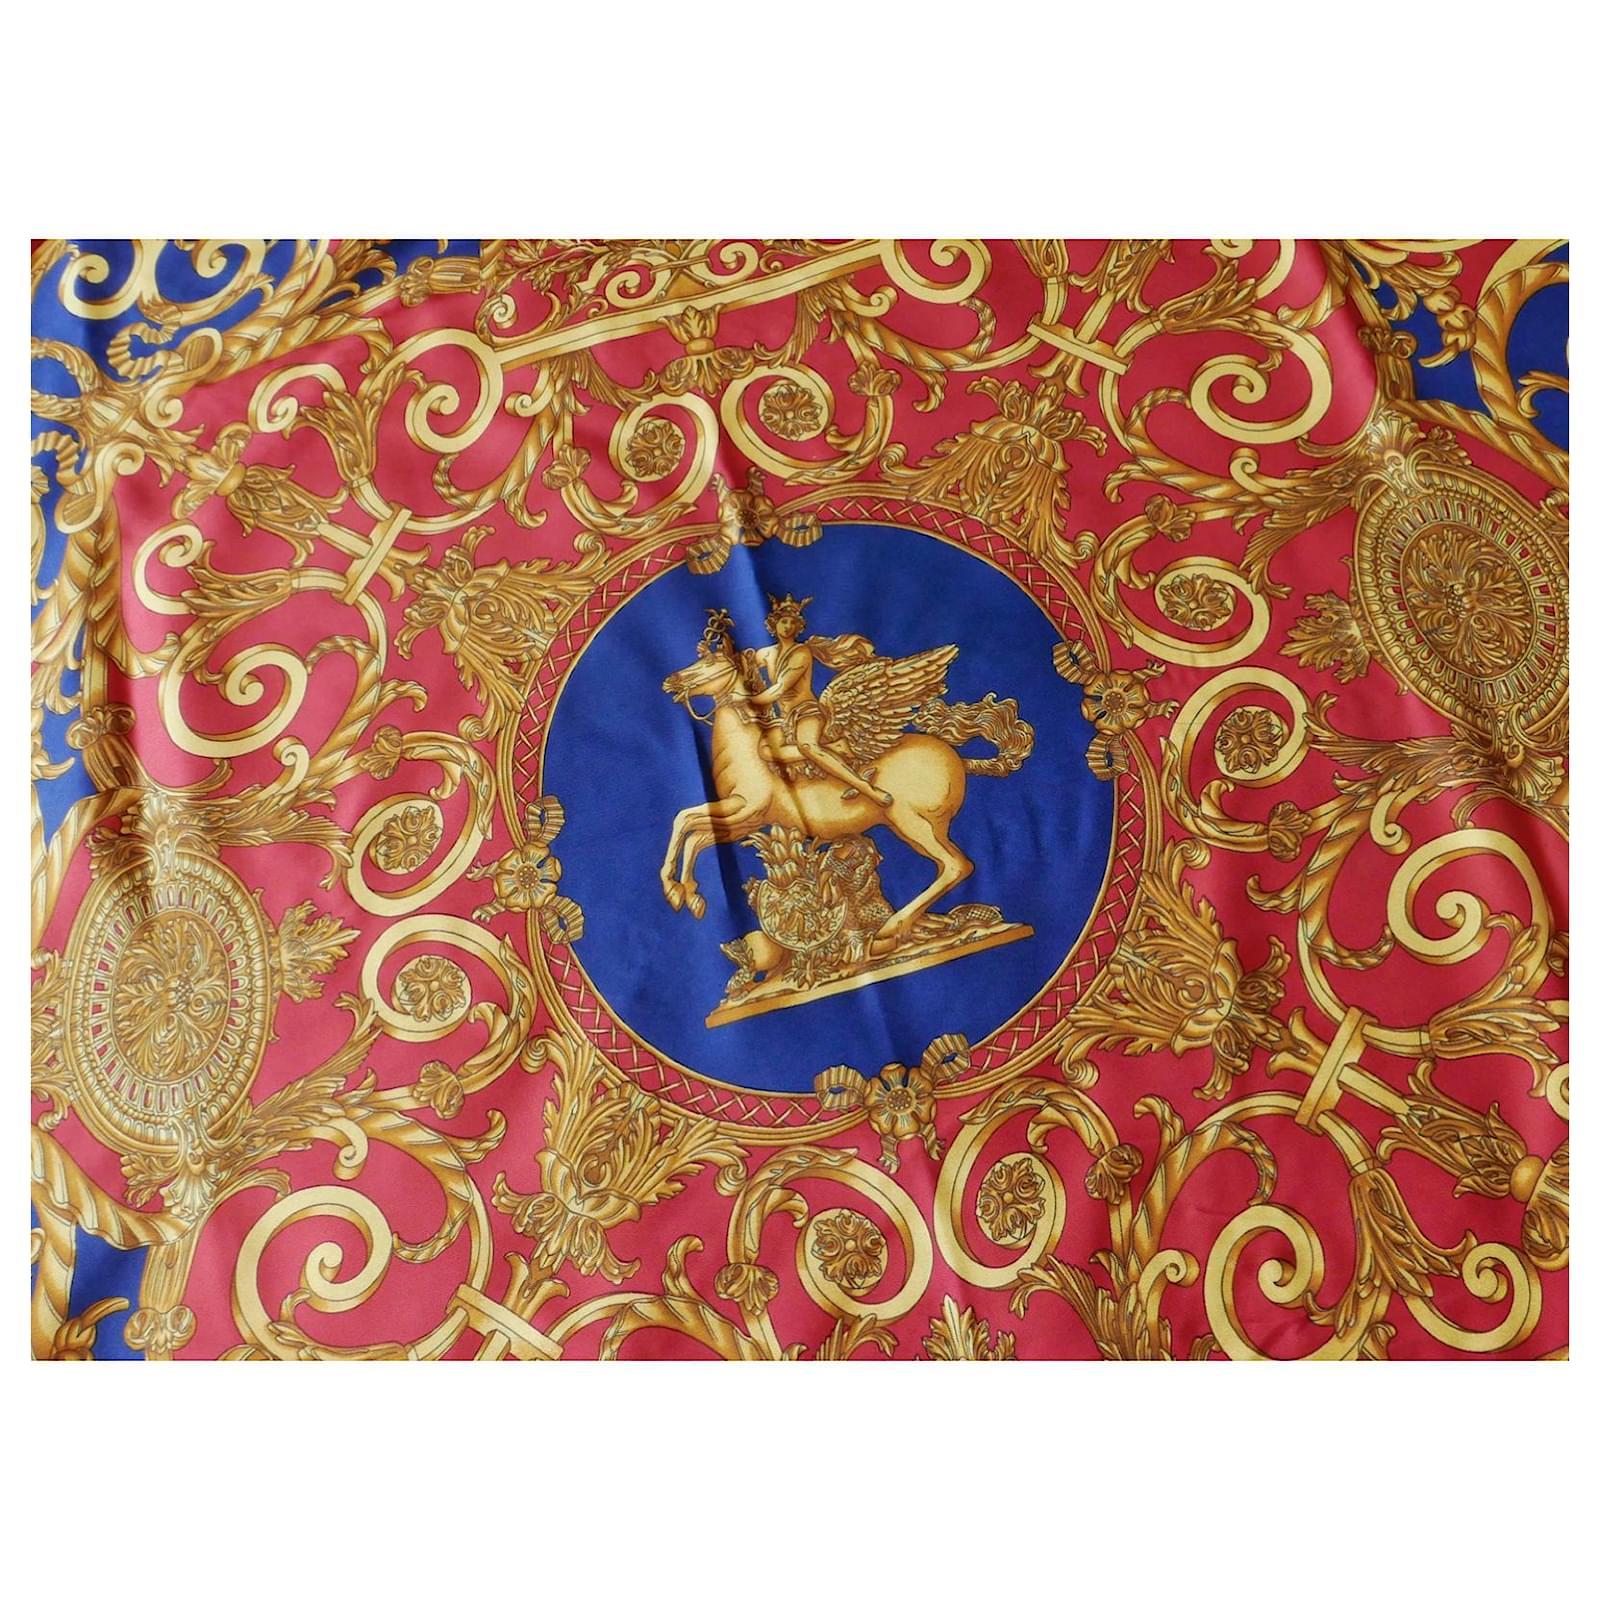 Gorgeous Hermes Les Tuileries vintage scarf in blue/red/gold silk with hand rolled edgings. Measures approx 32” x 32”. Comes in original box.

